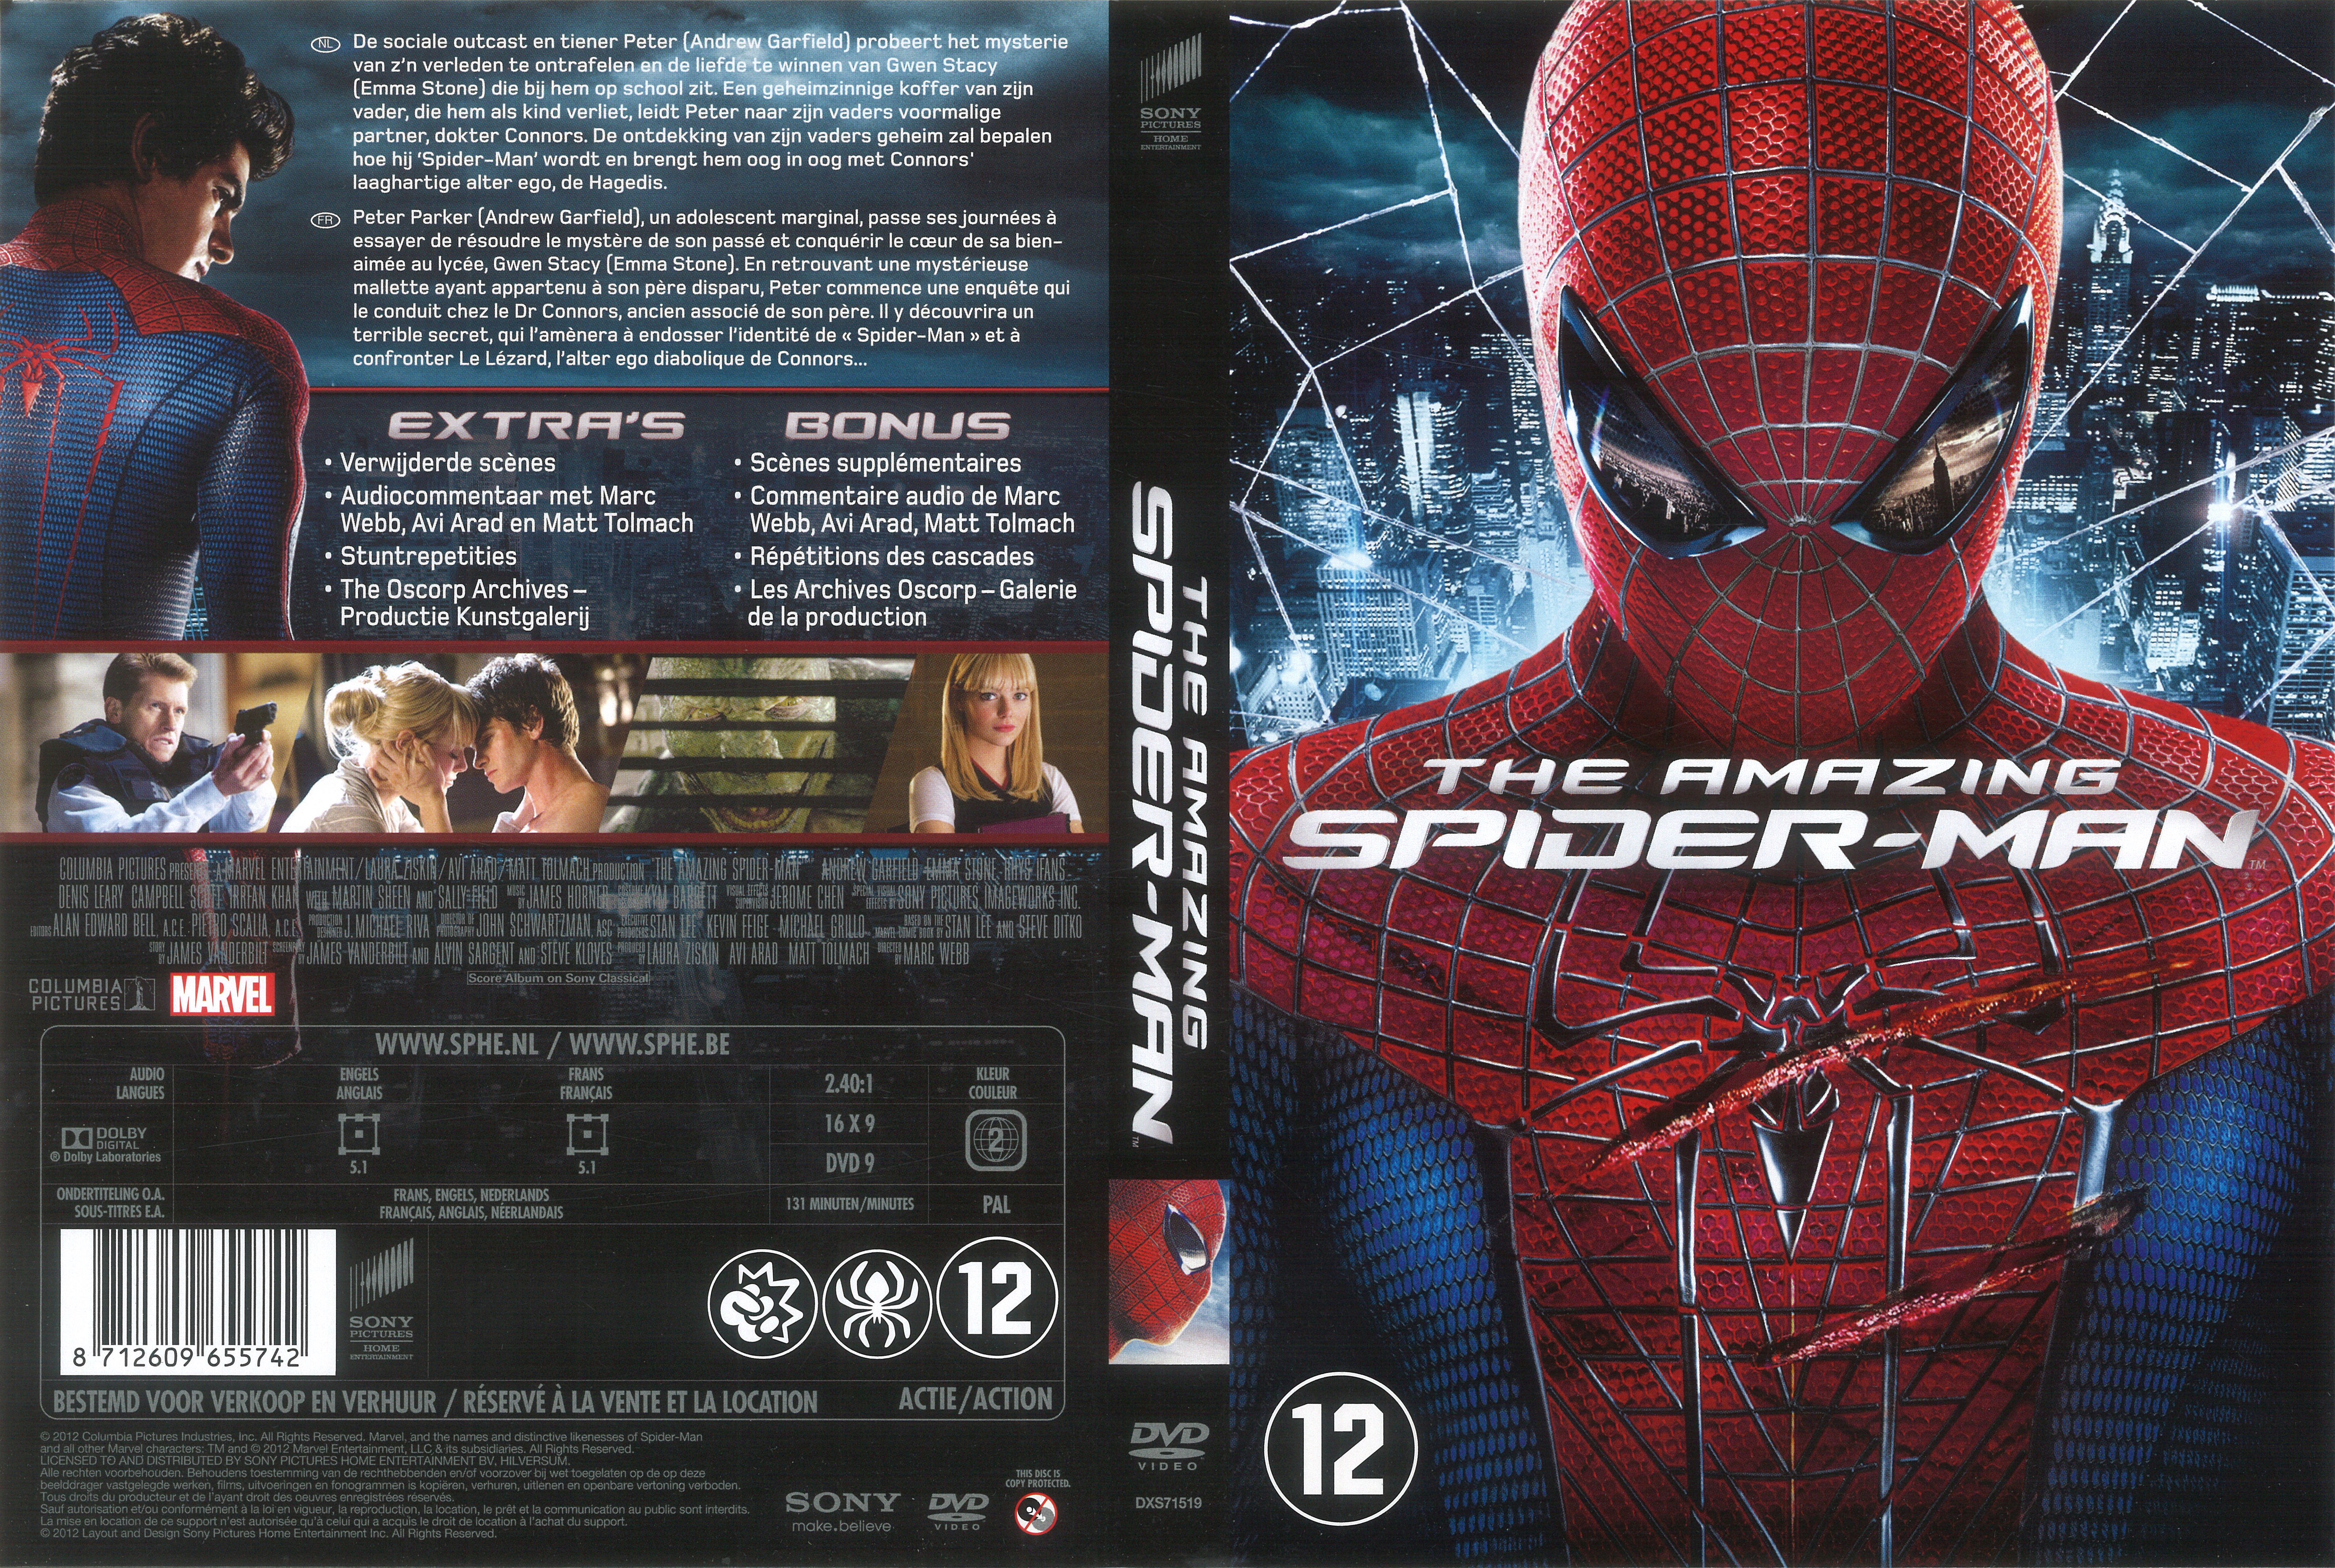 Jaquette DVD The Amazing Spider-Man v2